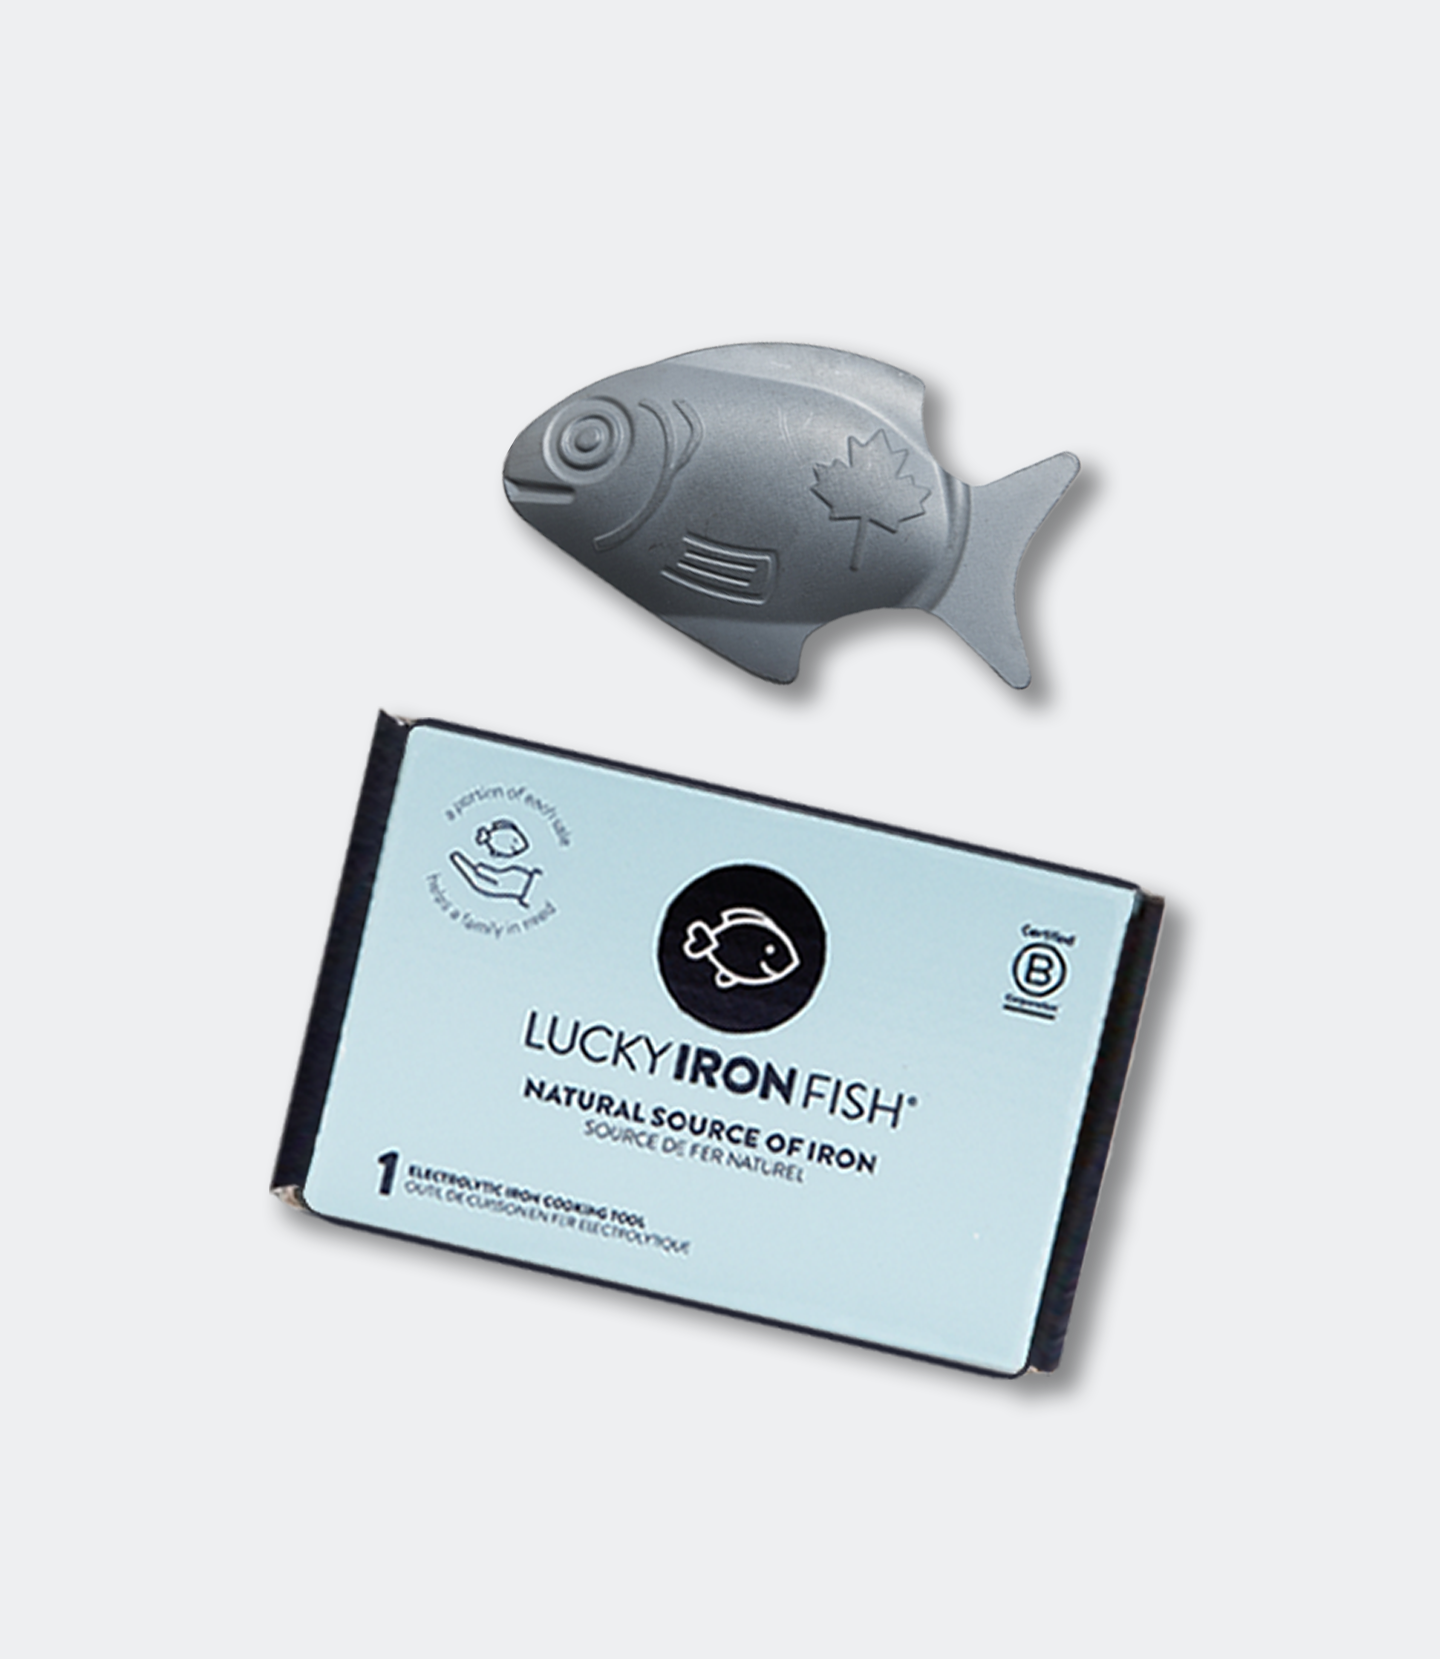 Kitchen gadget review: Lucky Iron Fish – I call this health tool